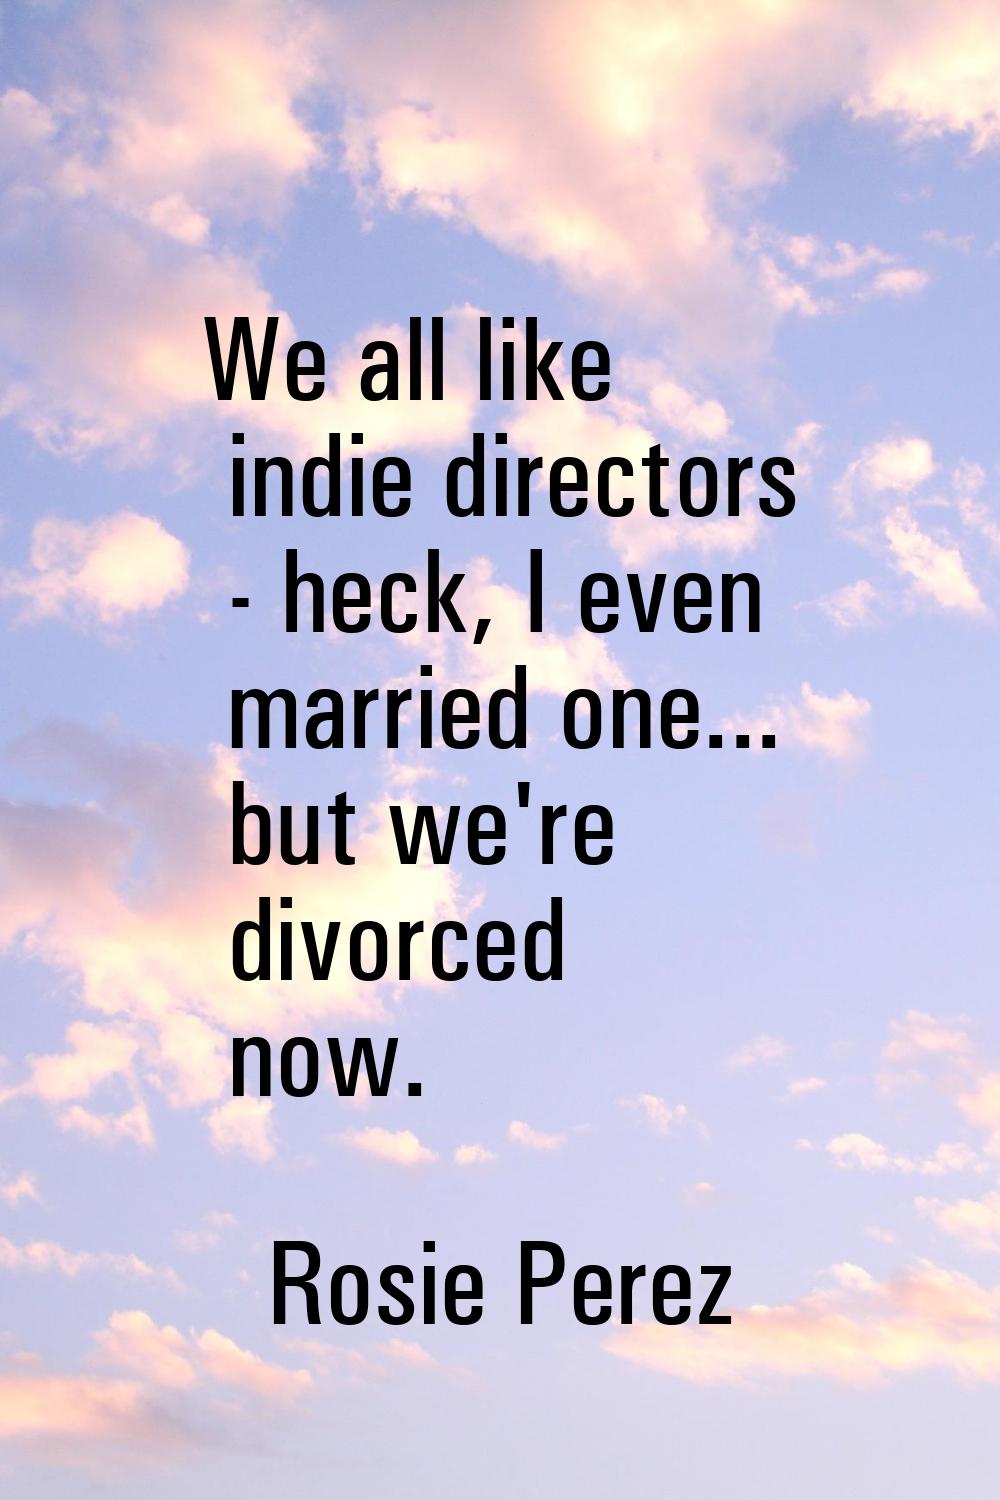 We all like indie directors - heck, I even married one... but we're divorced now.